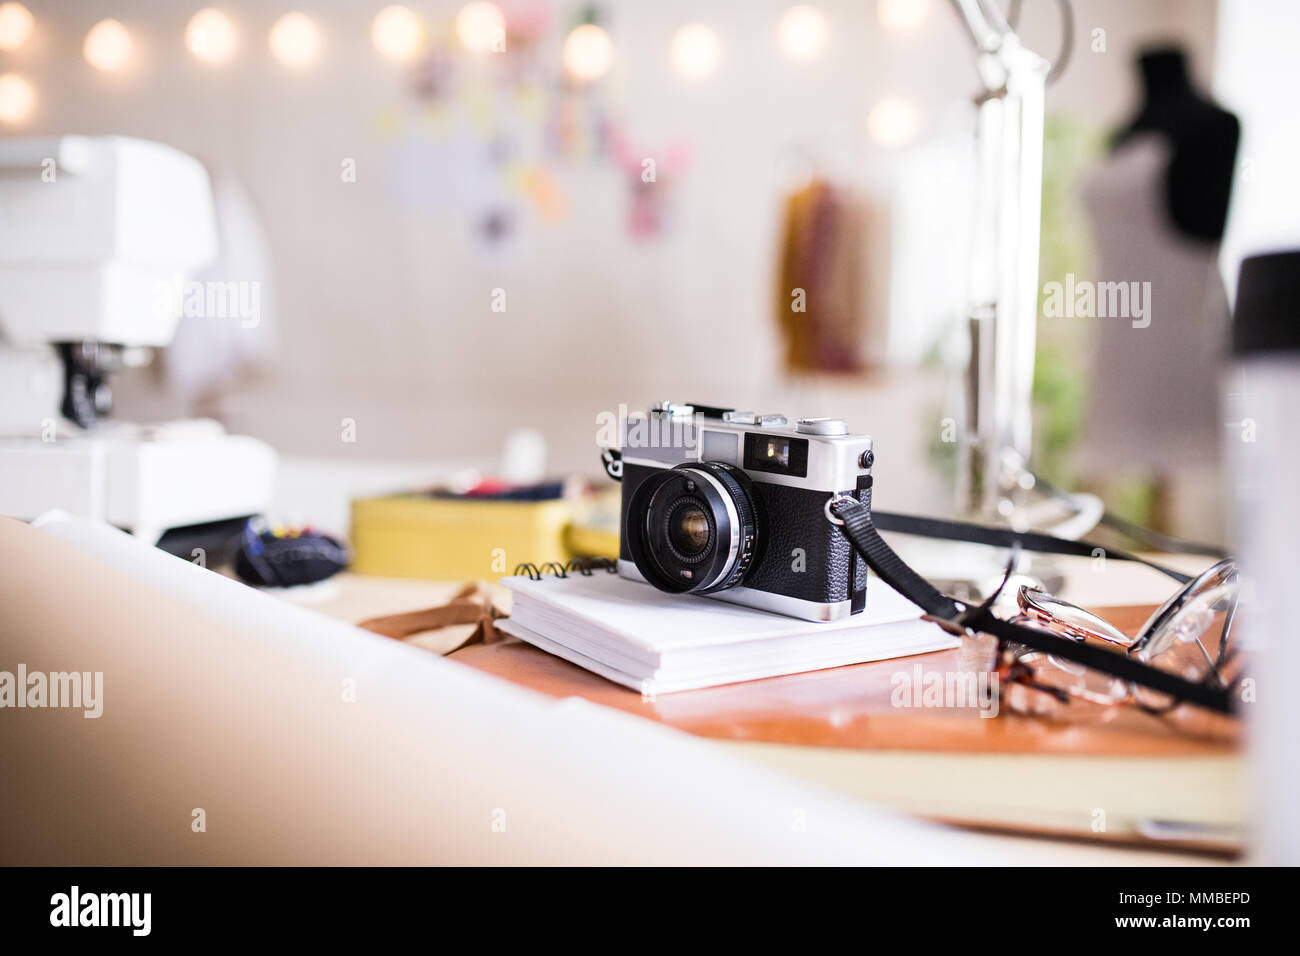 A camera on a table in interior of a studio, startup business. Stock Photo